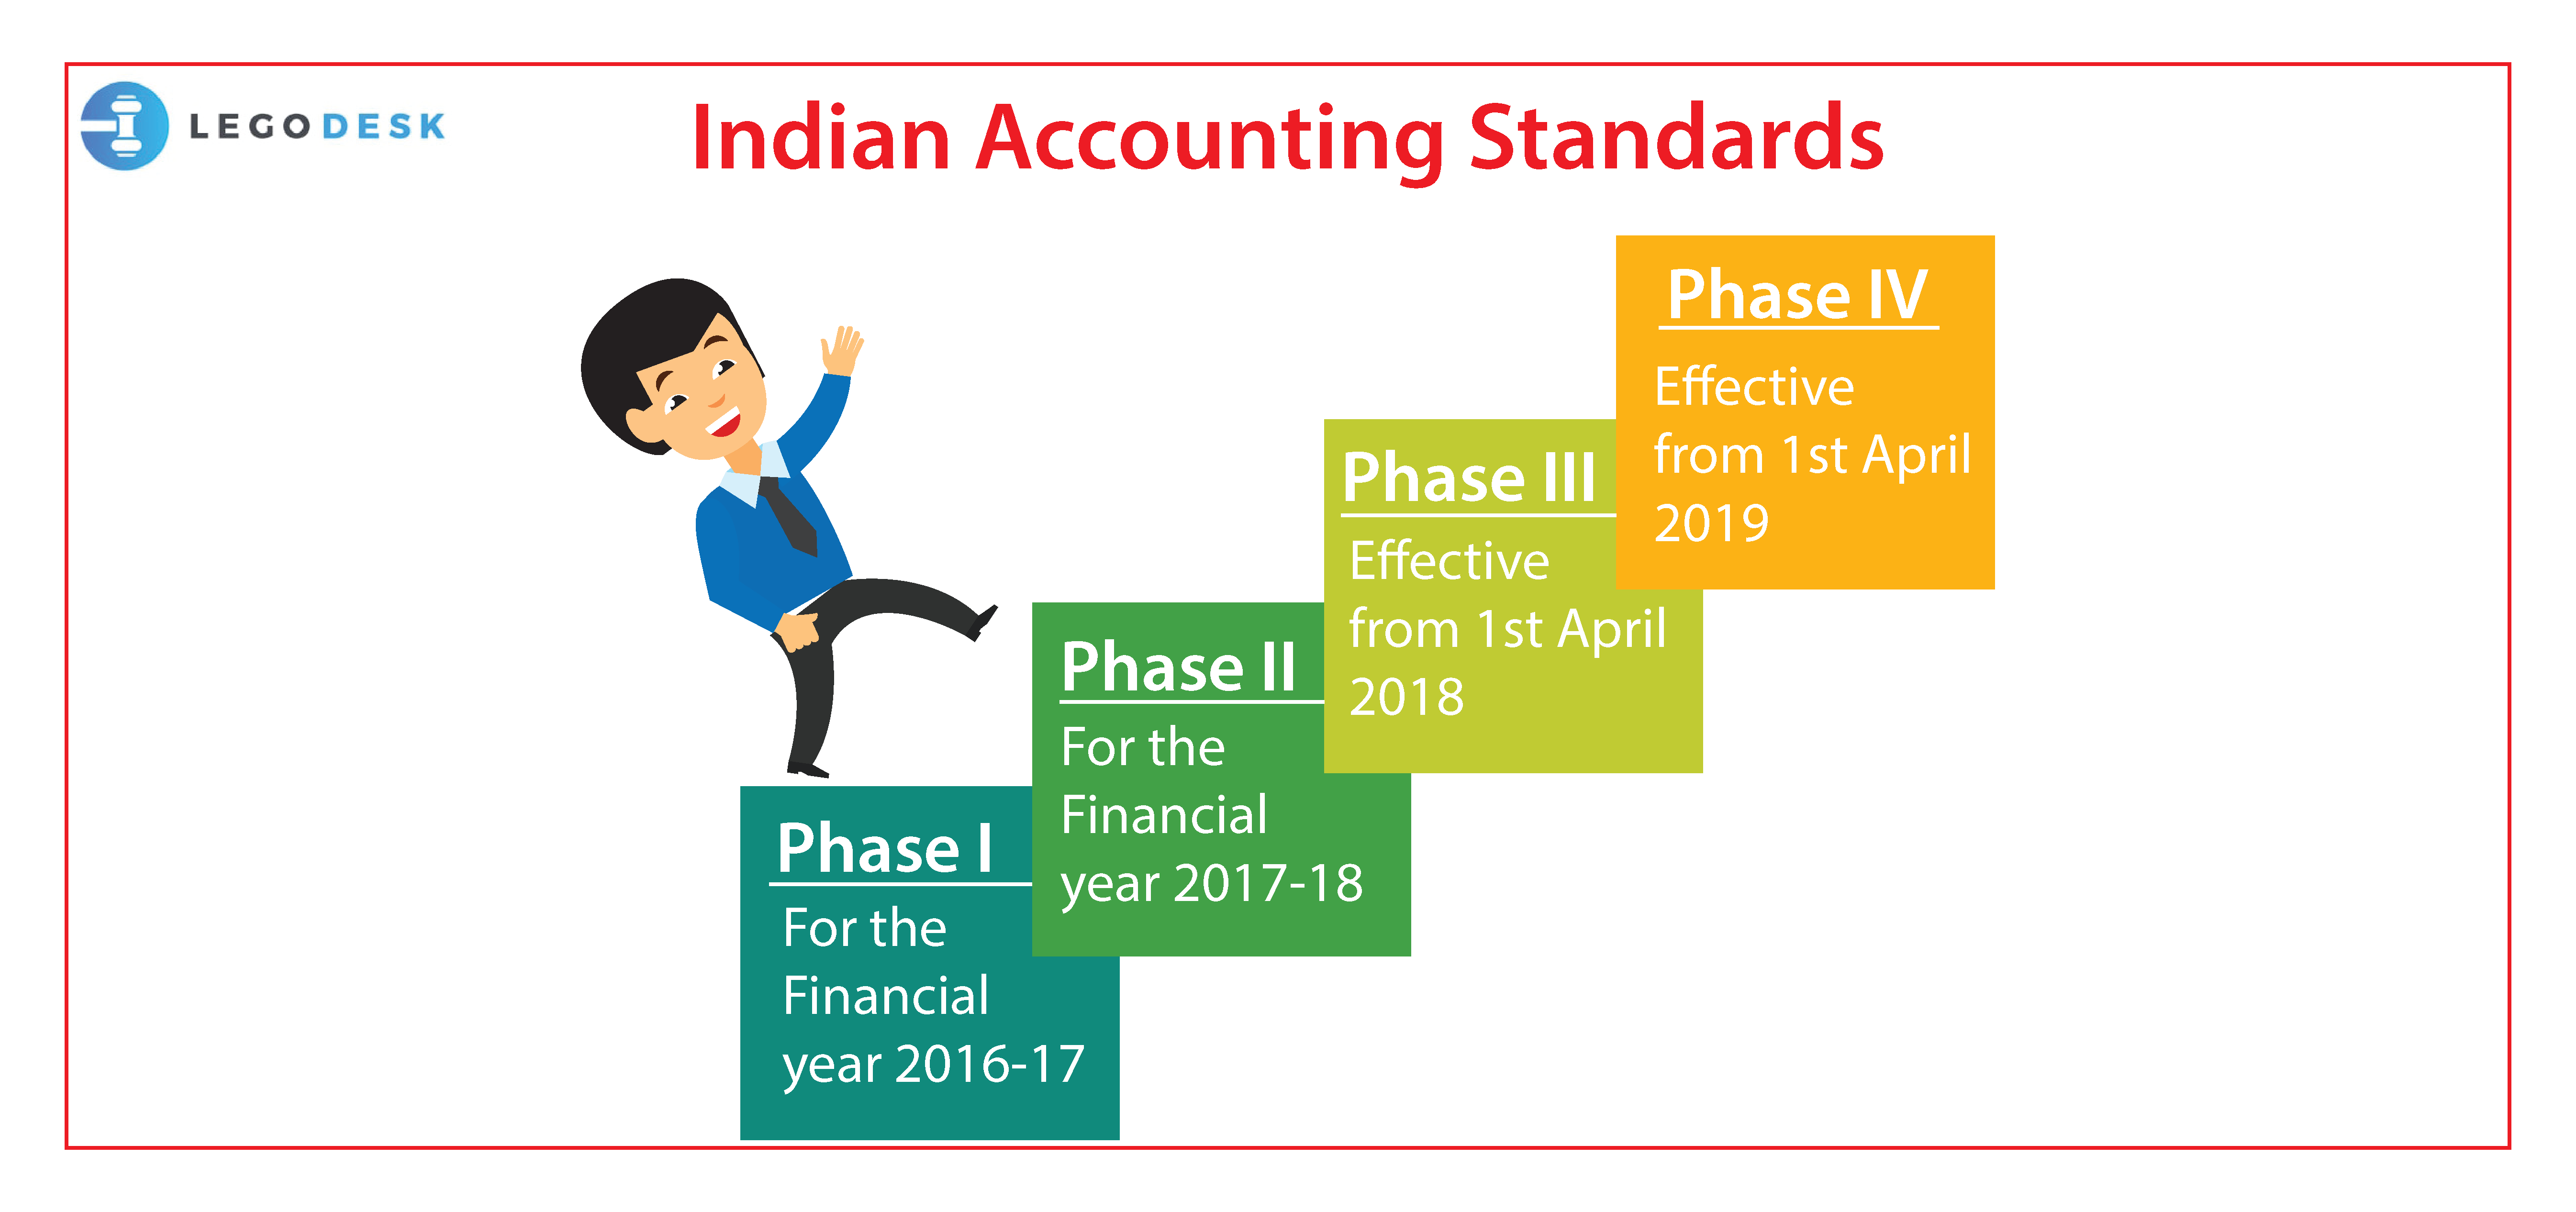 IND AS Applicability – Indian Accounting Standards